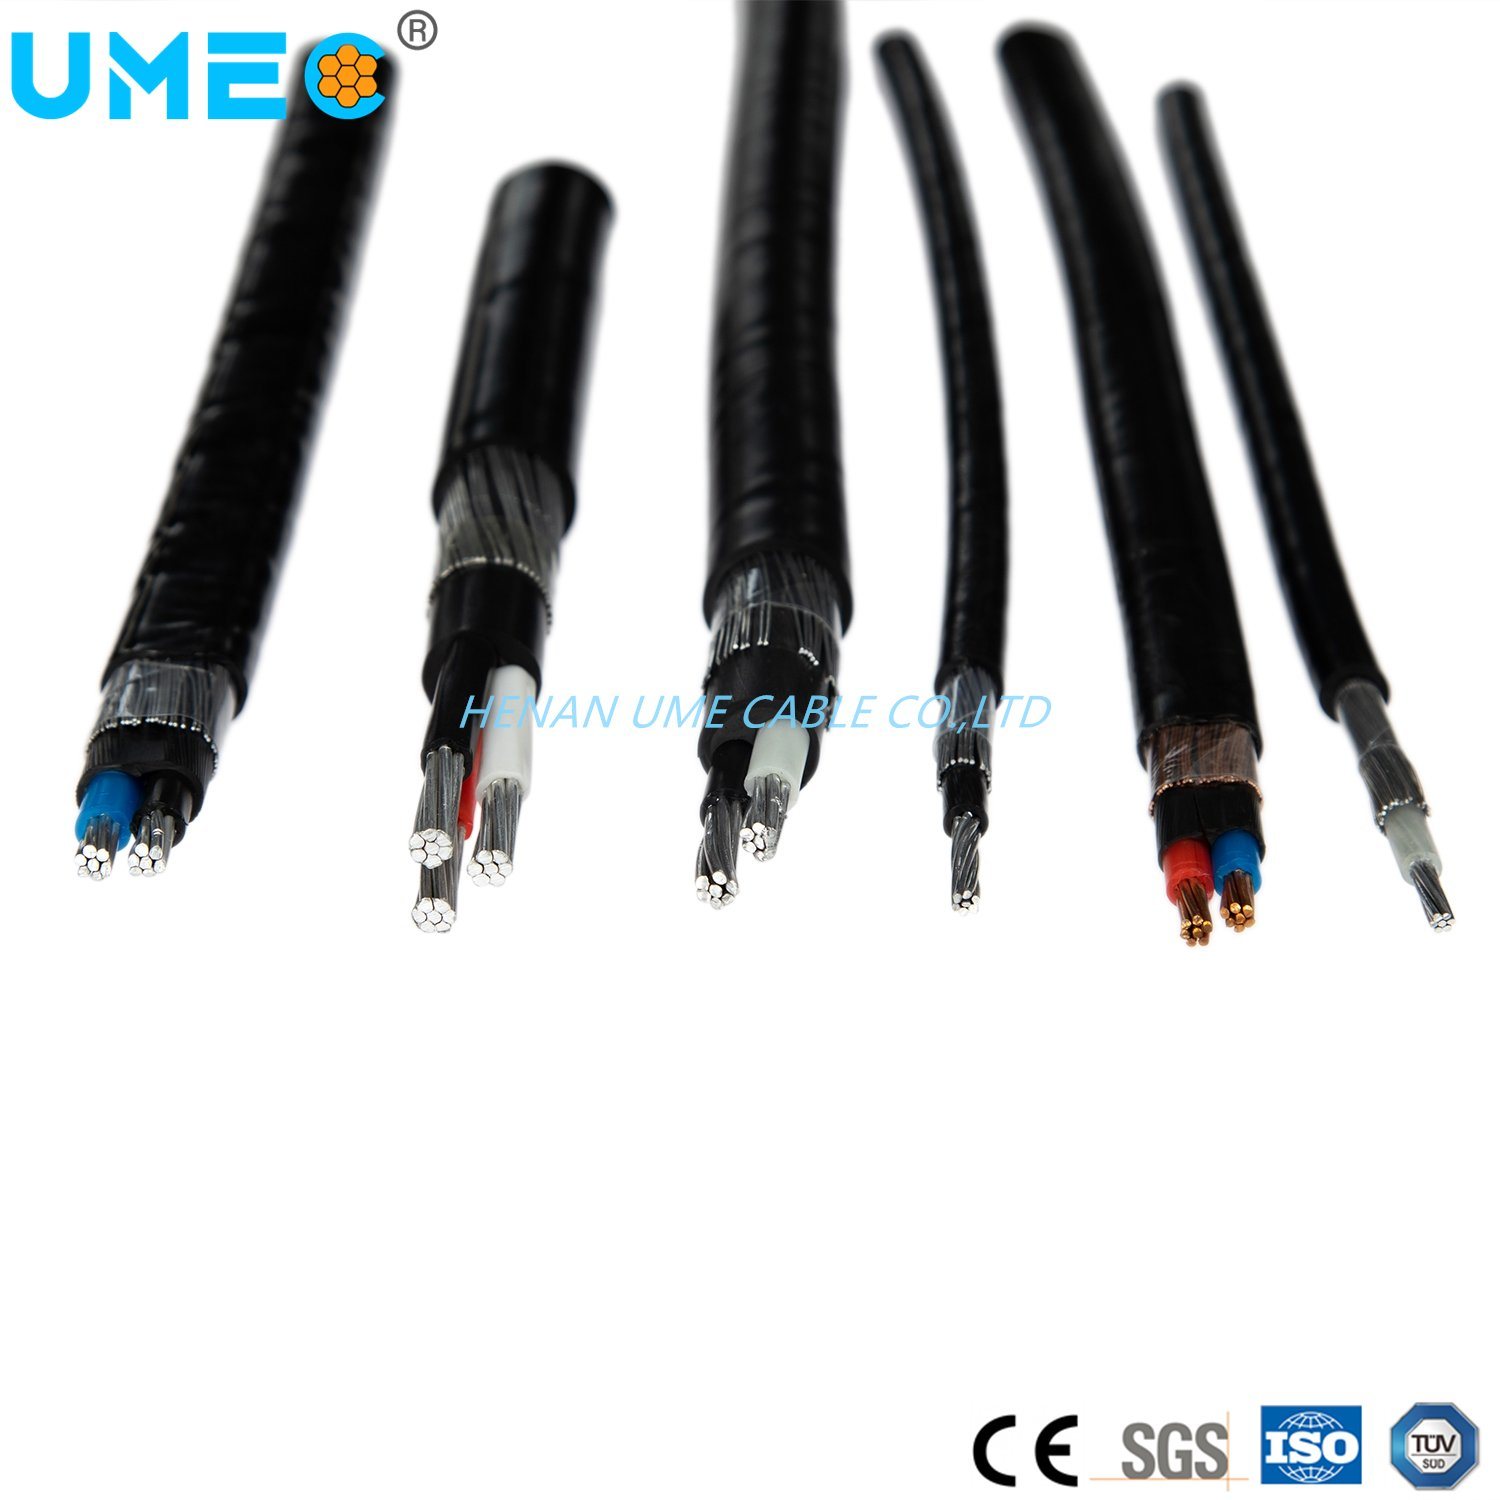 Cross Link Polyethylene Insulation Poly Vinyl Chloride Stranded Copper Conductor Concentric Cable